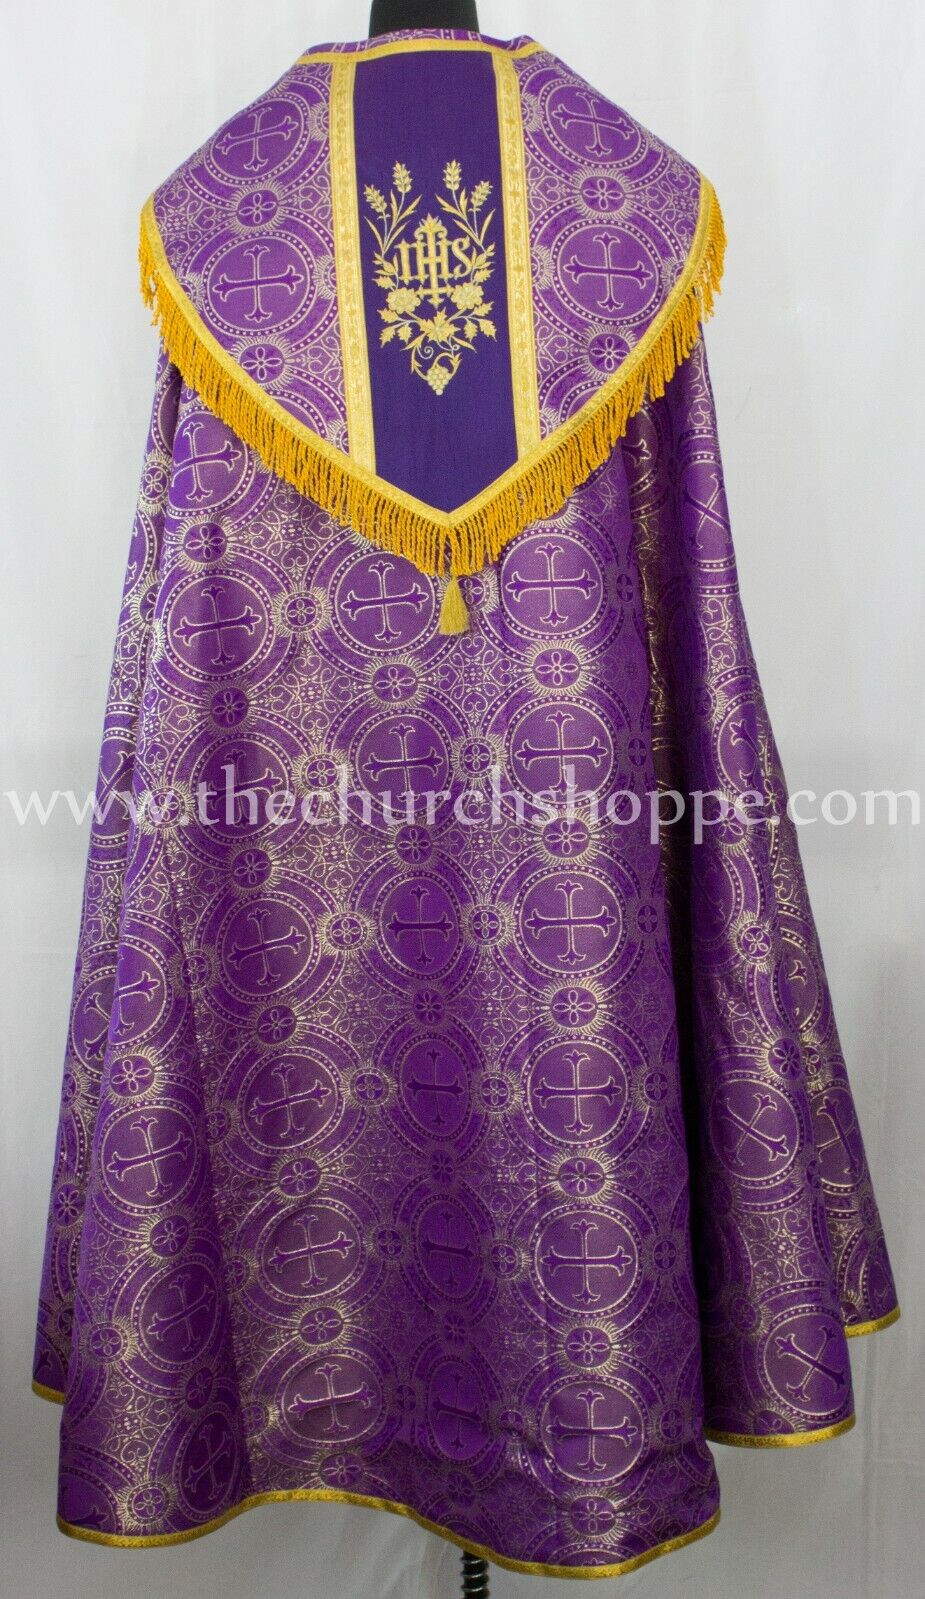 Metallic Purple  Cope & Stole Set with IHS embroidery,capa pluvial